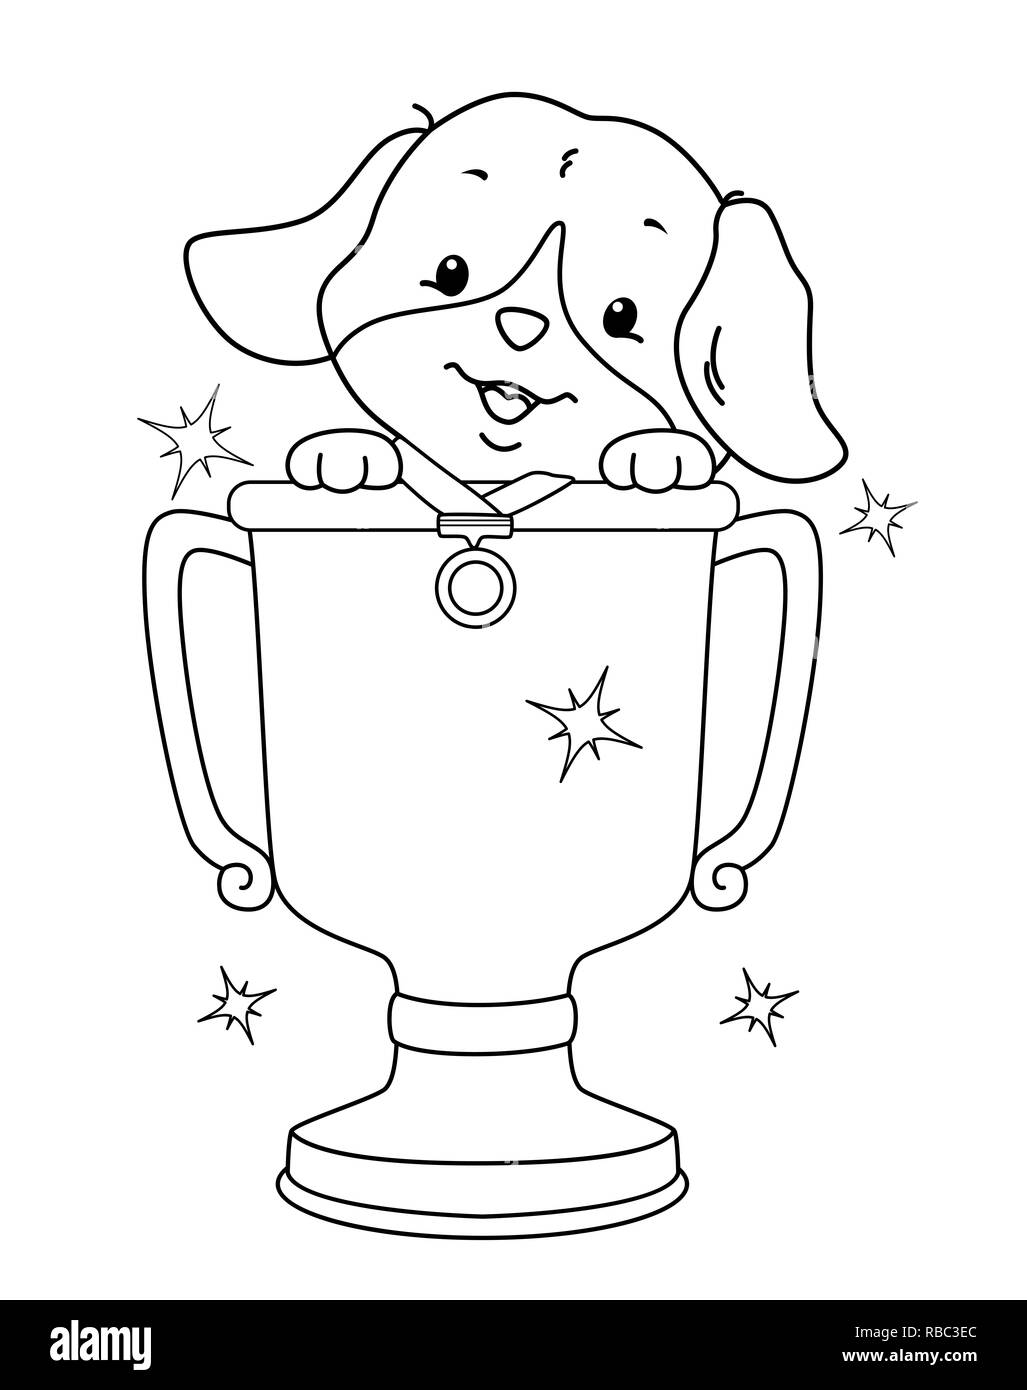 Coloring Illustration of a Dog Winning a Medal and a Trophy from a Contest Stock Photo